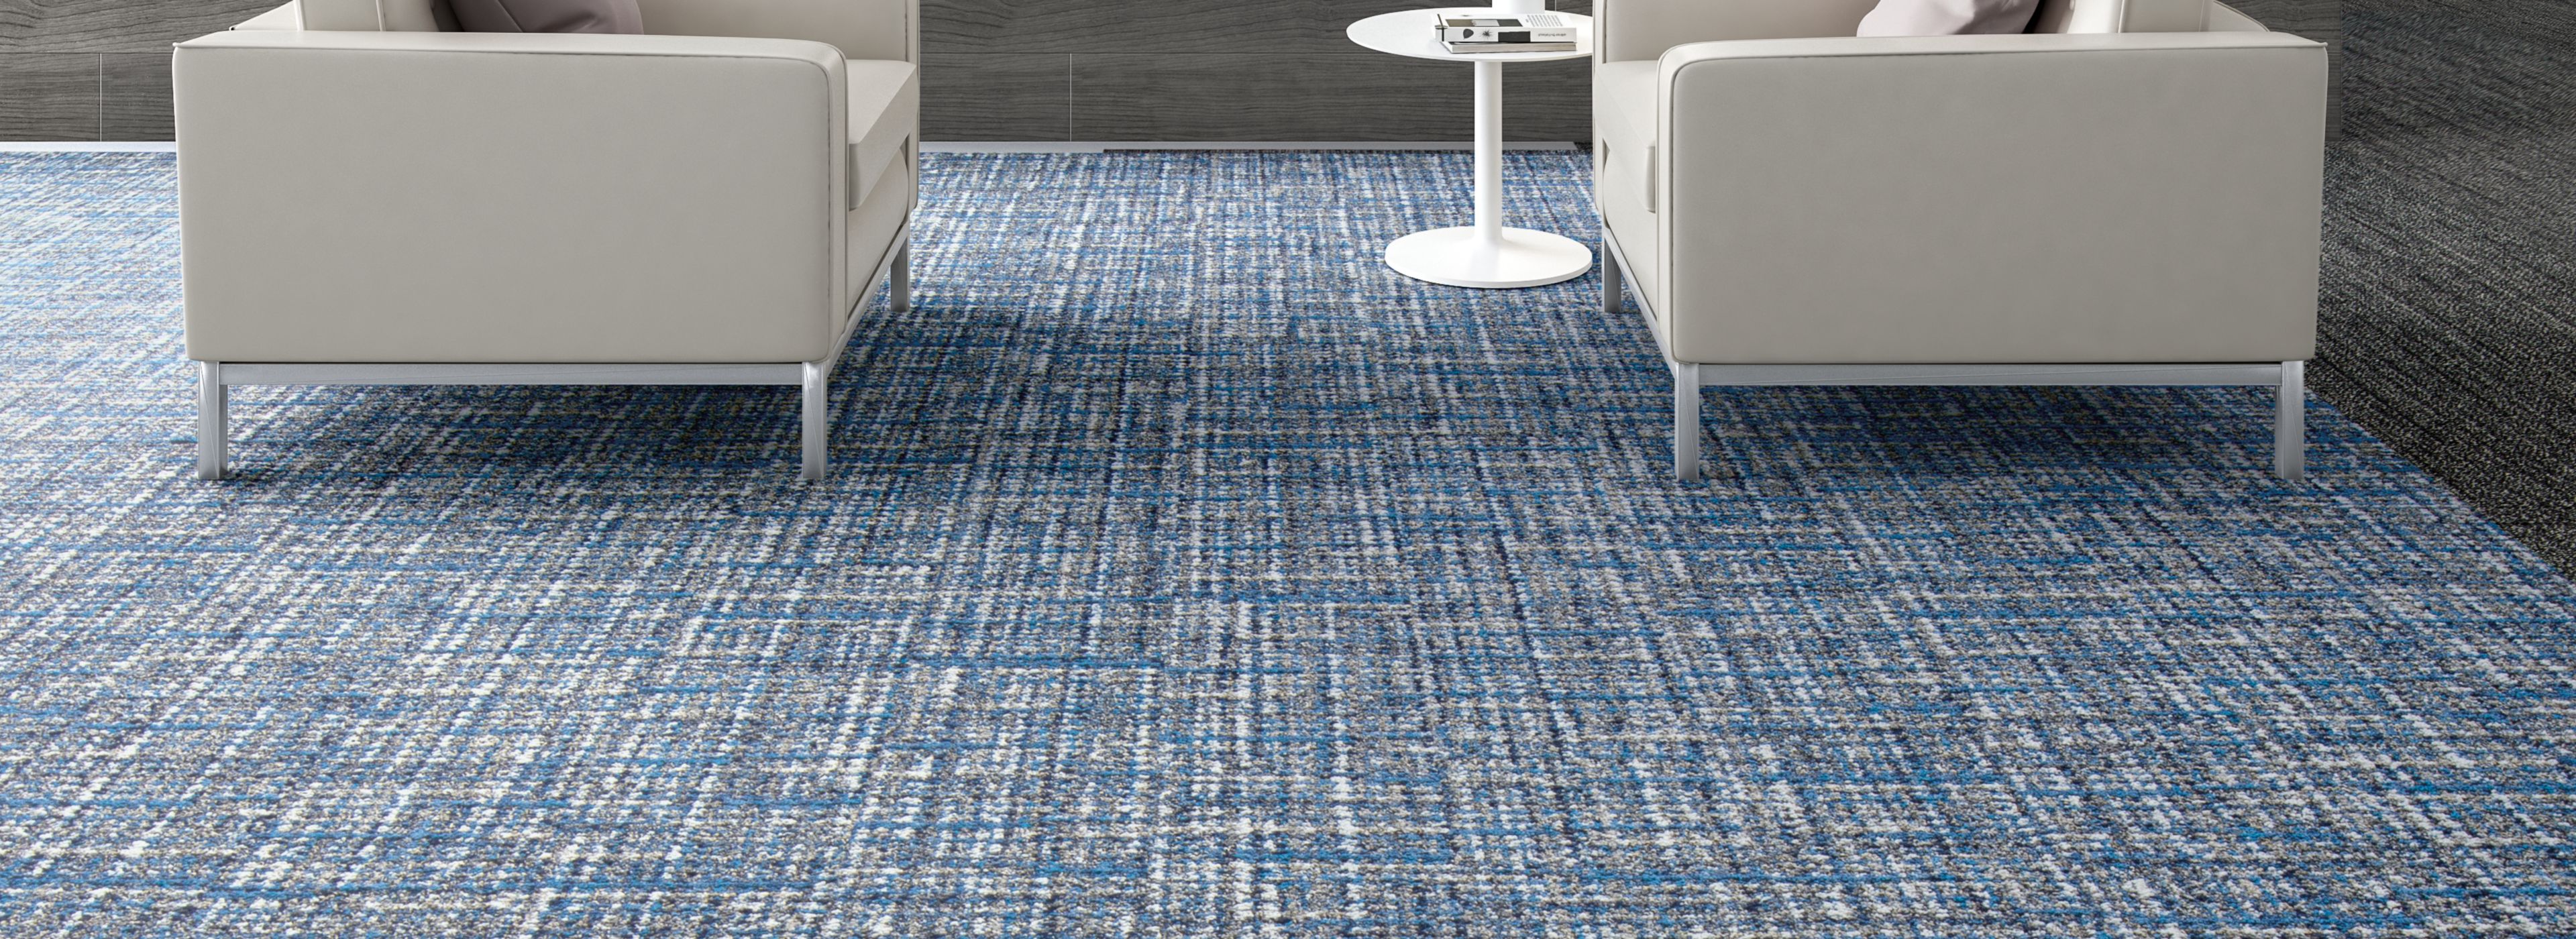 image Interface WW895 plank carpet tile in lobby area with couches and side table  numéro 1